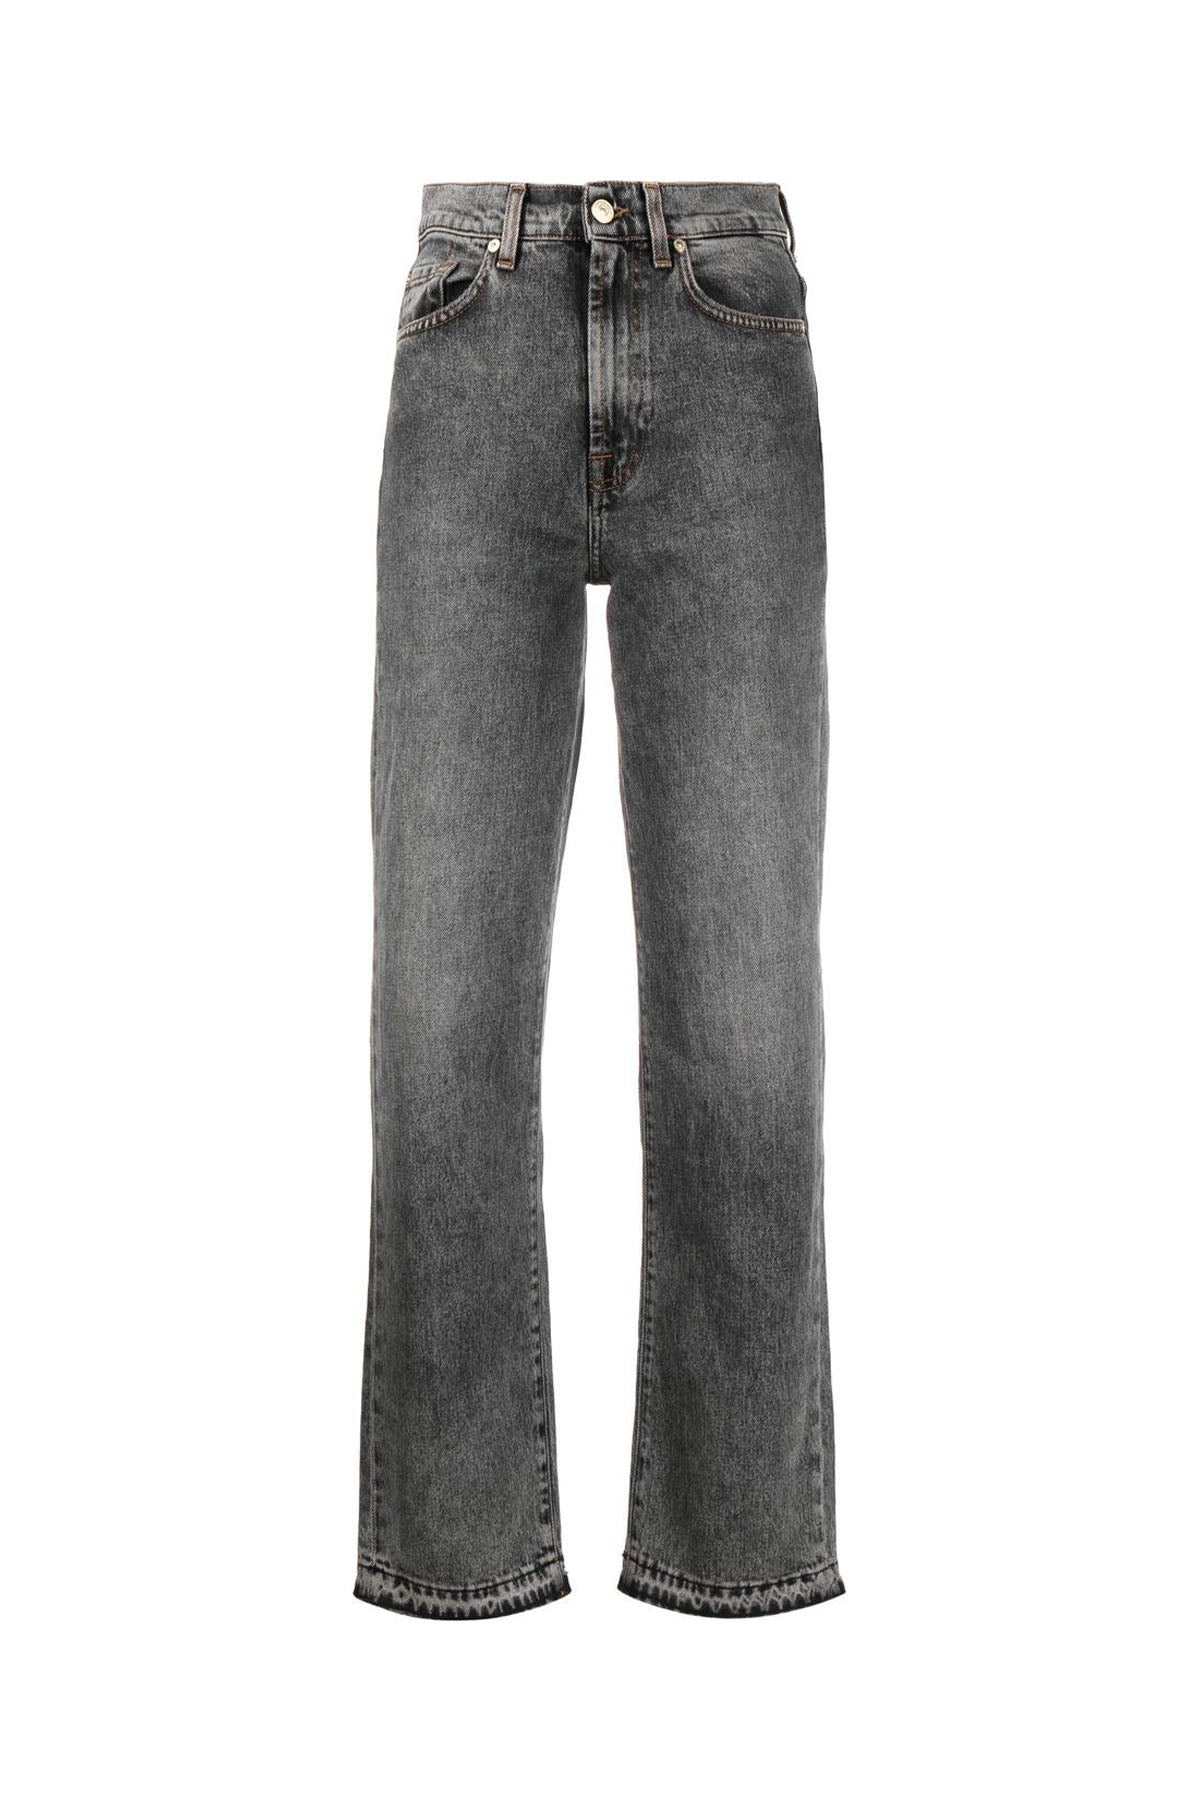 7 For All Mankind Tall Logan Stovepipe Straight Fit Jeans-Libas Trendy Fashion Store